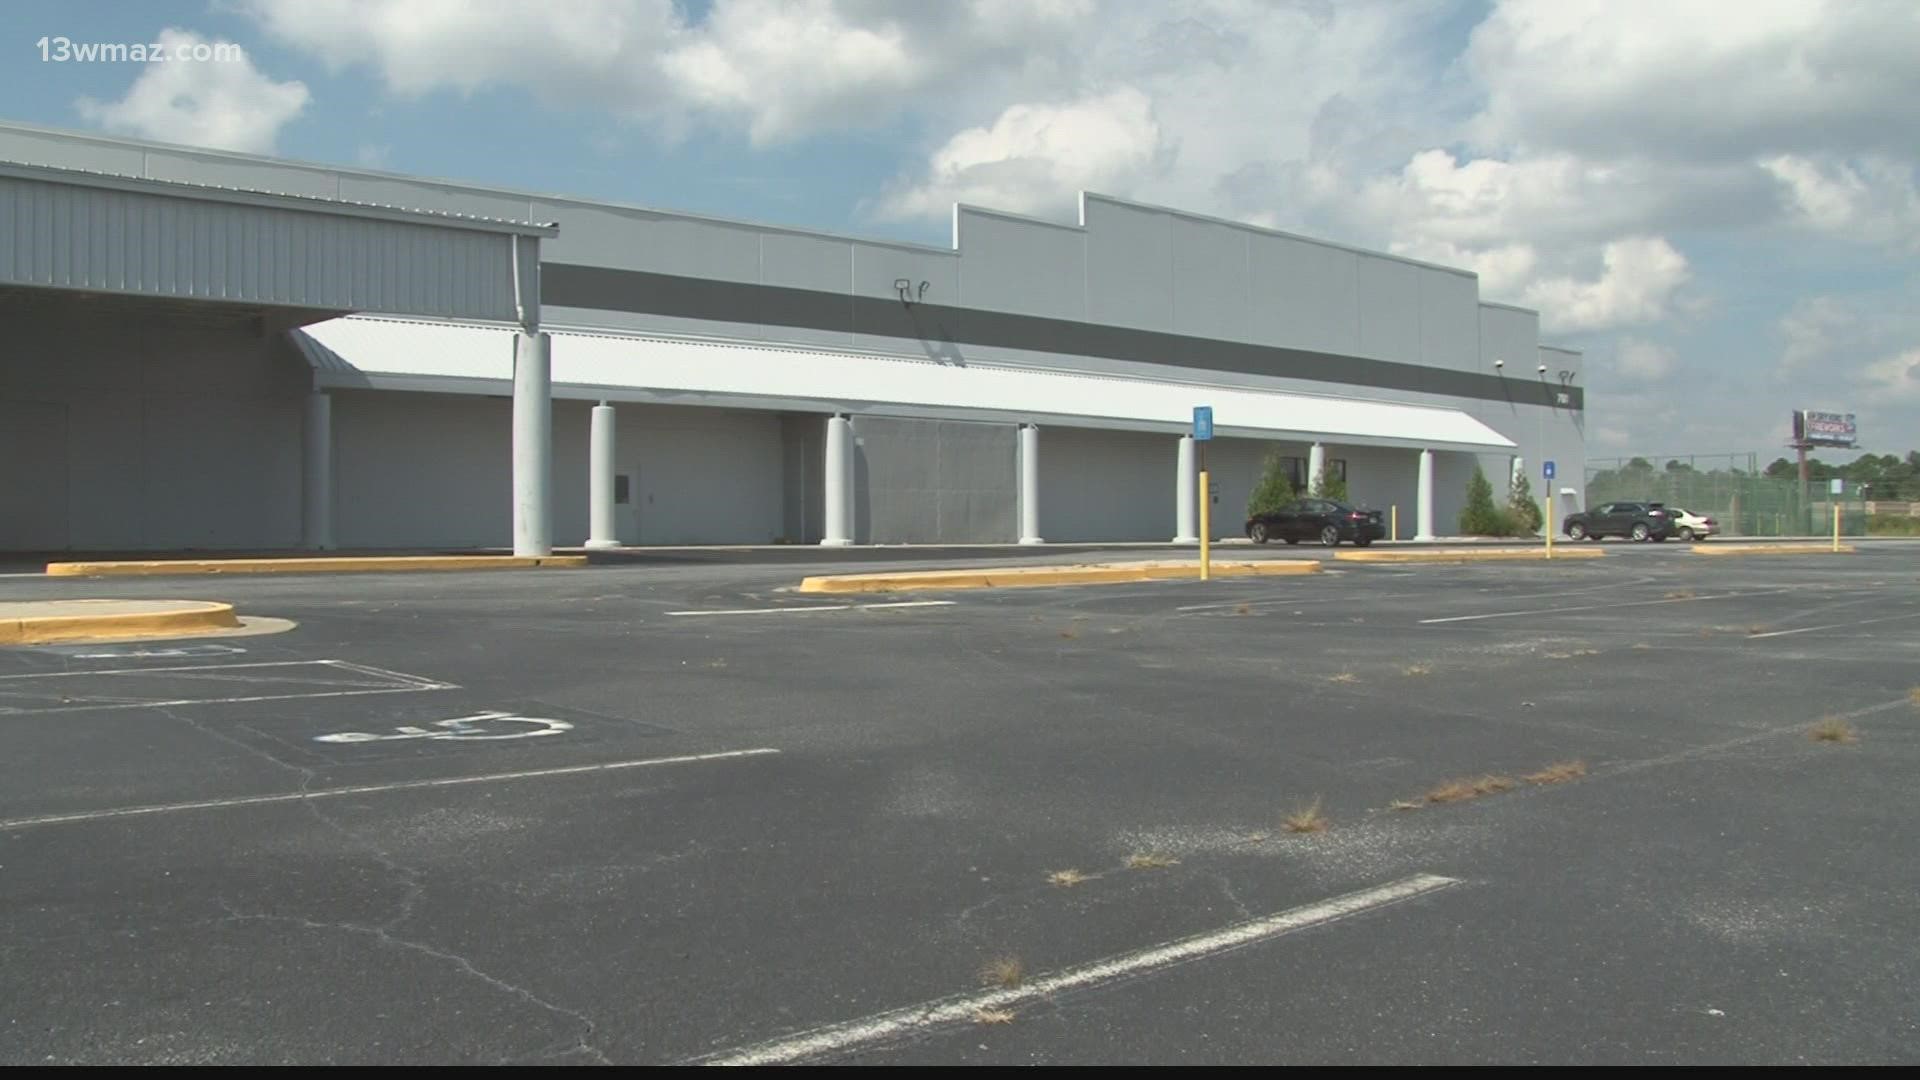 Macon Home Depot building sees new use